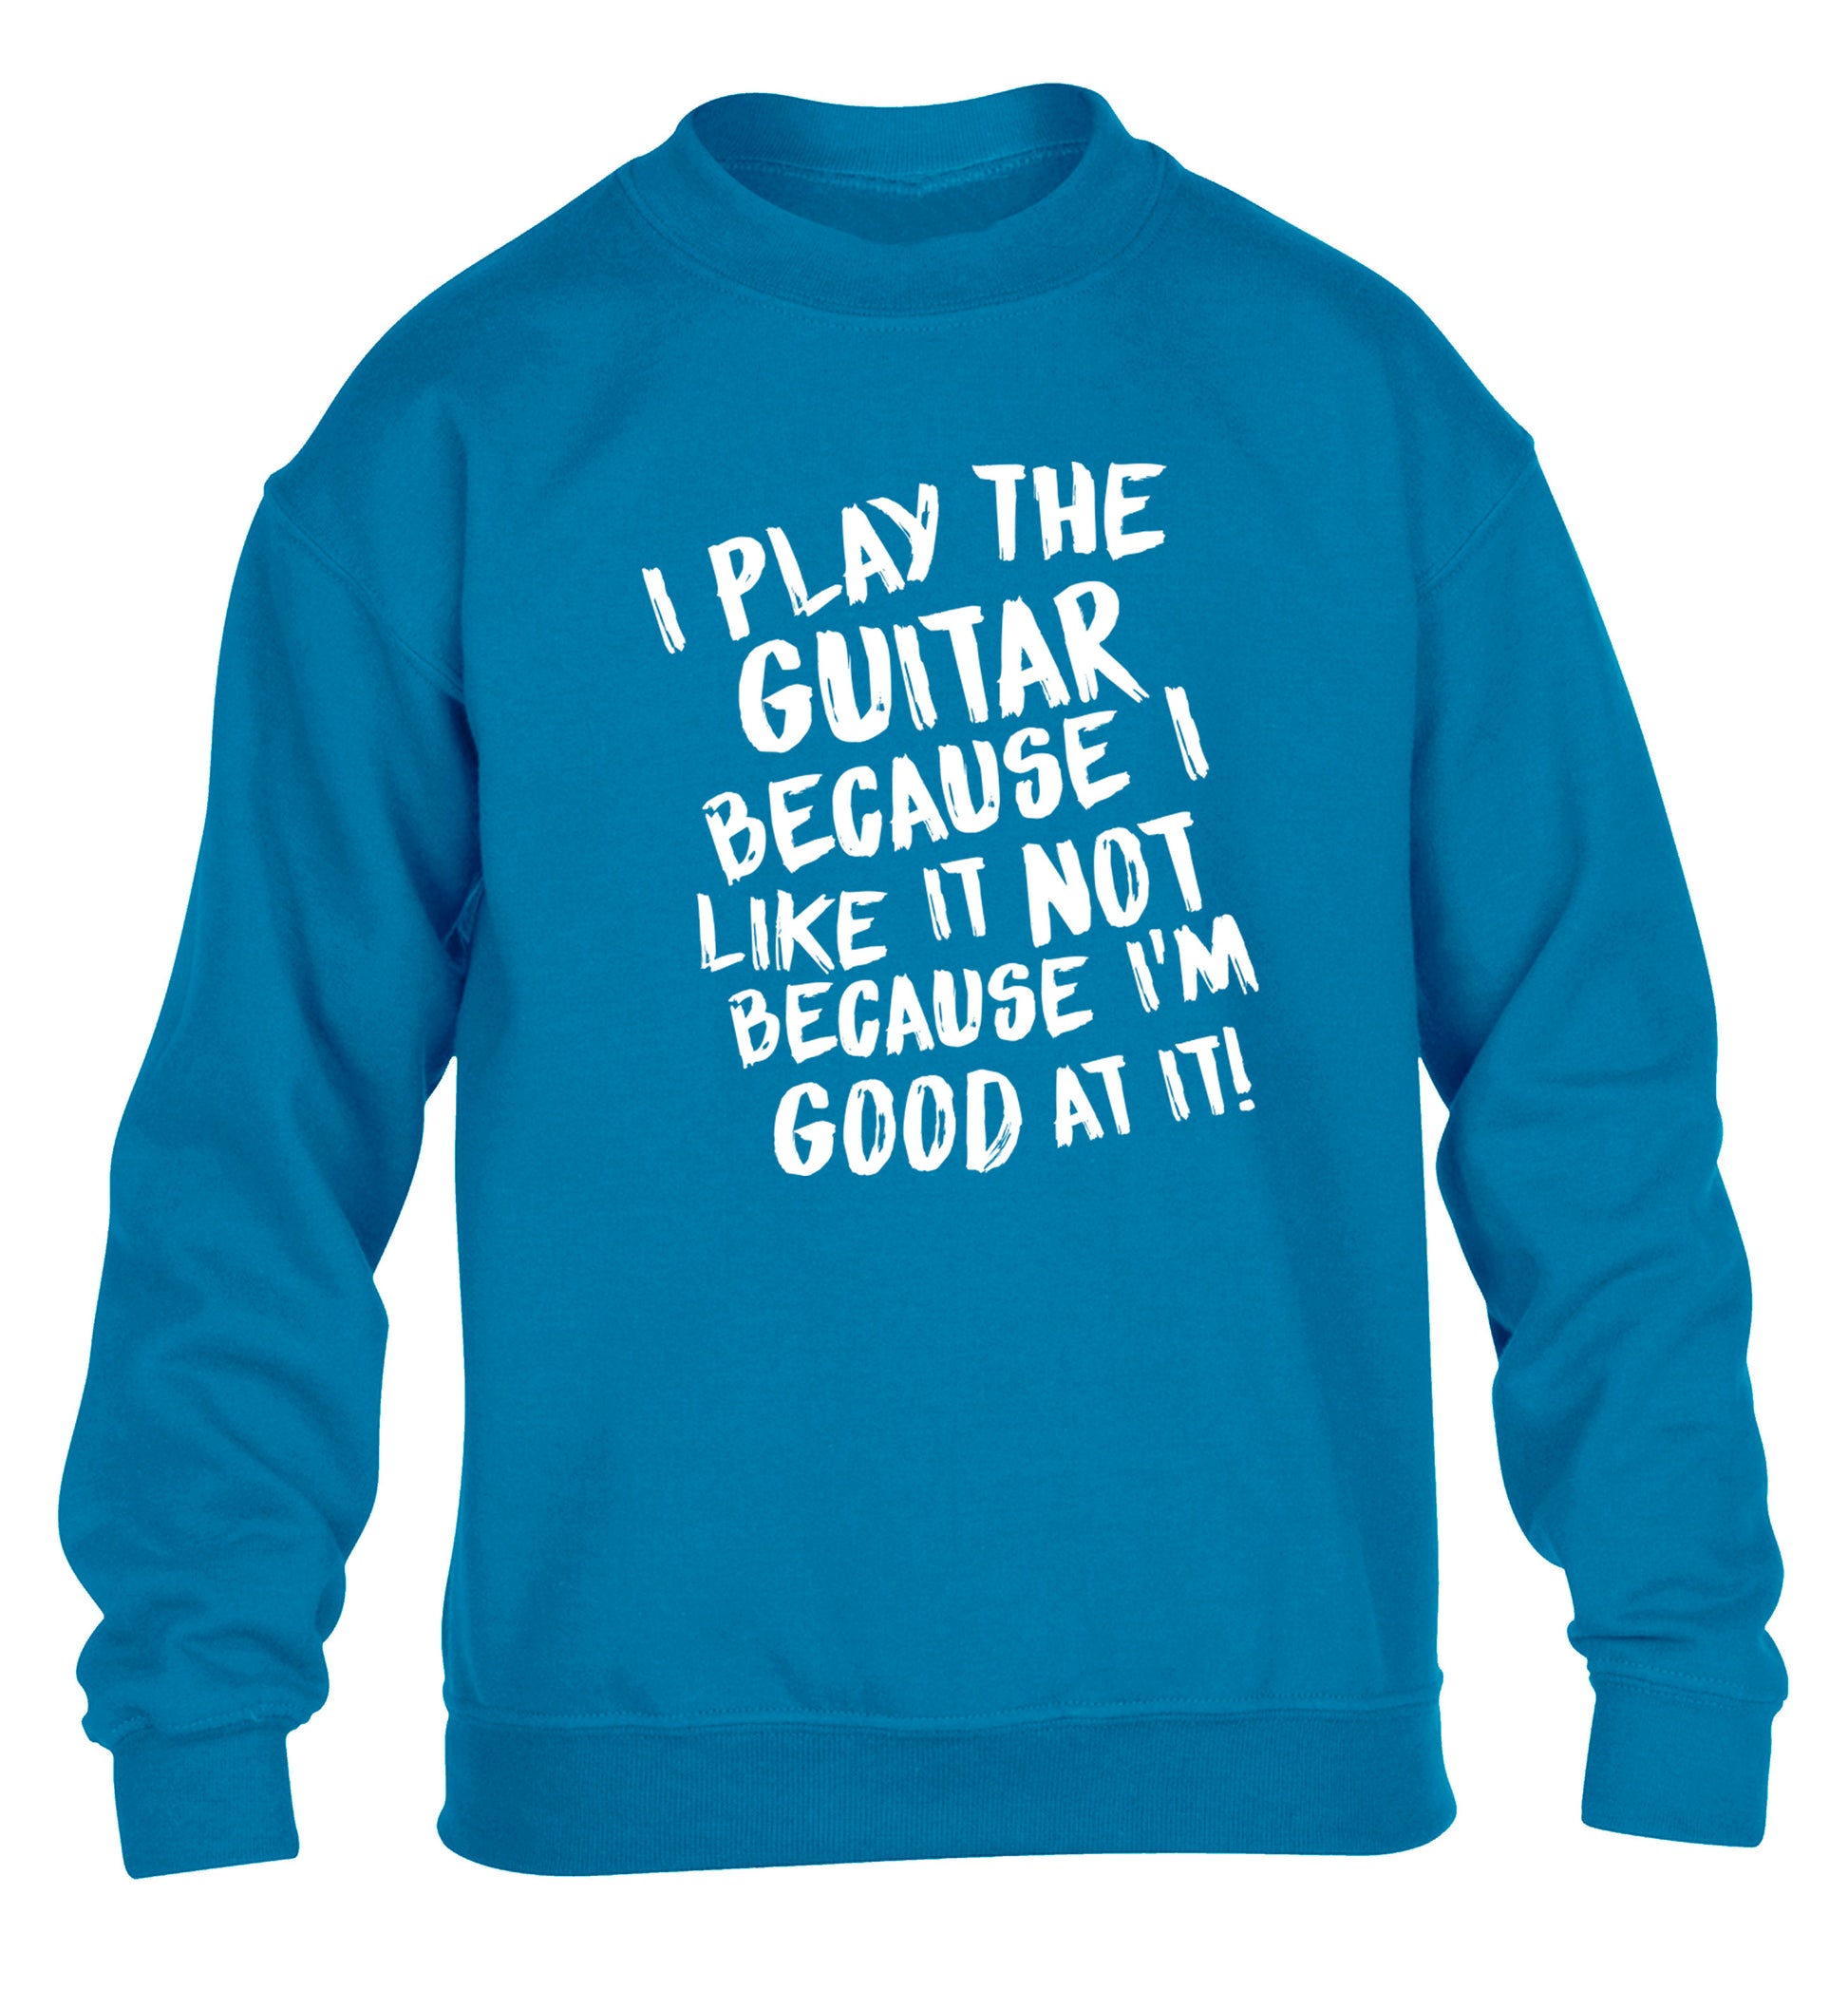 I play the guitar because I like it not because I'm good at it children's blue sweater 12-14 Years